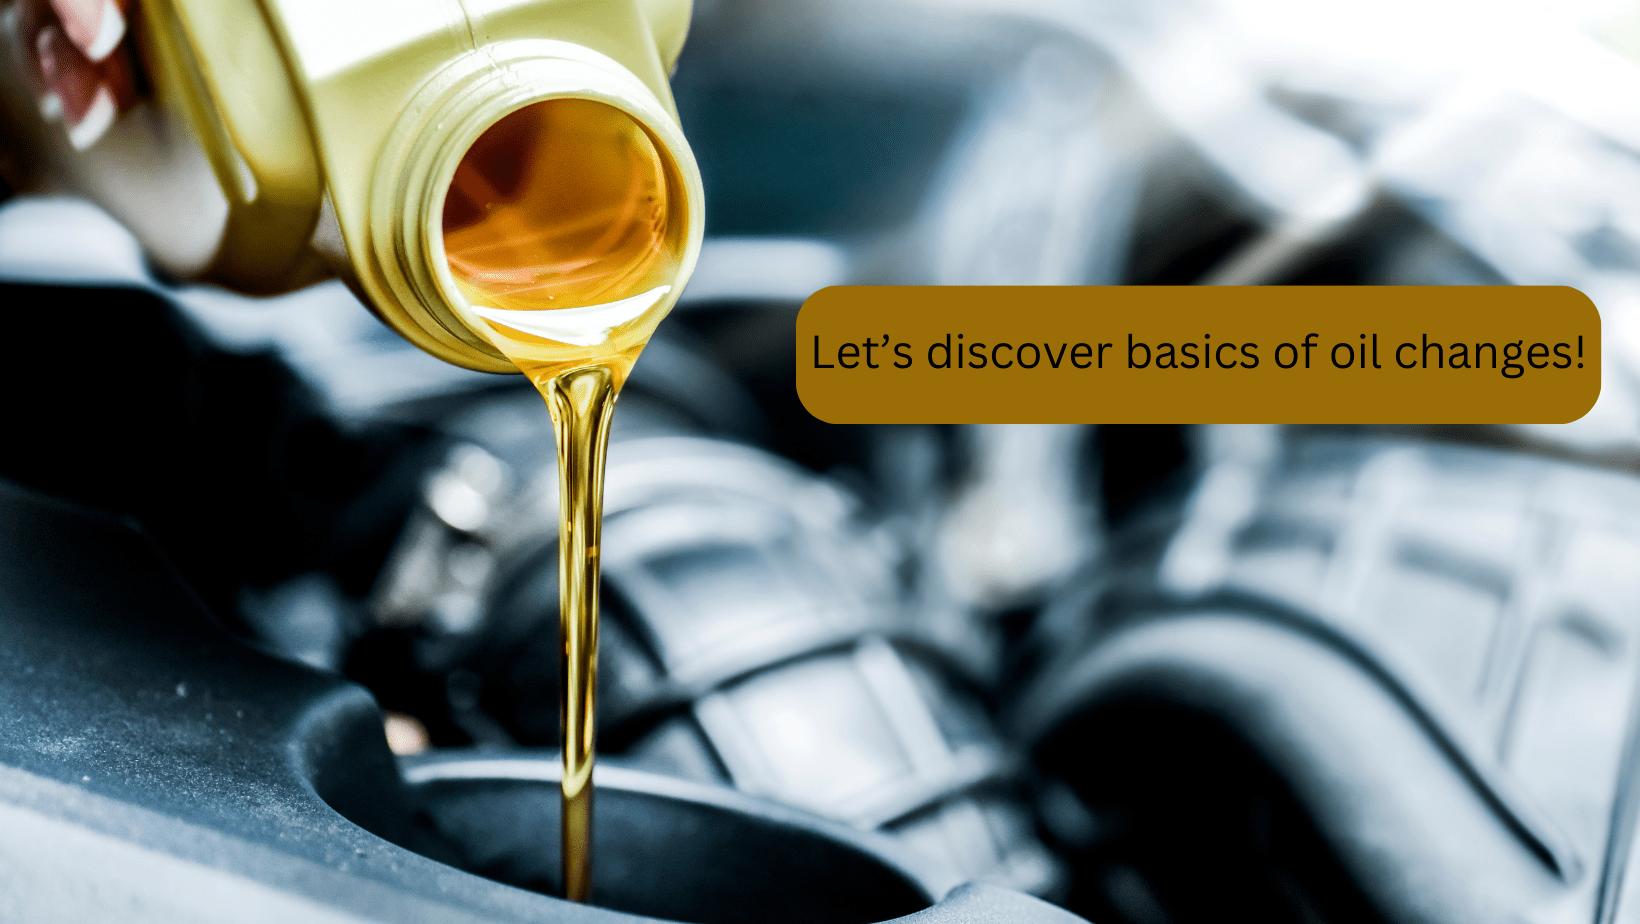 Basics of oil changes in our guide